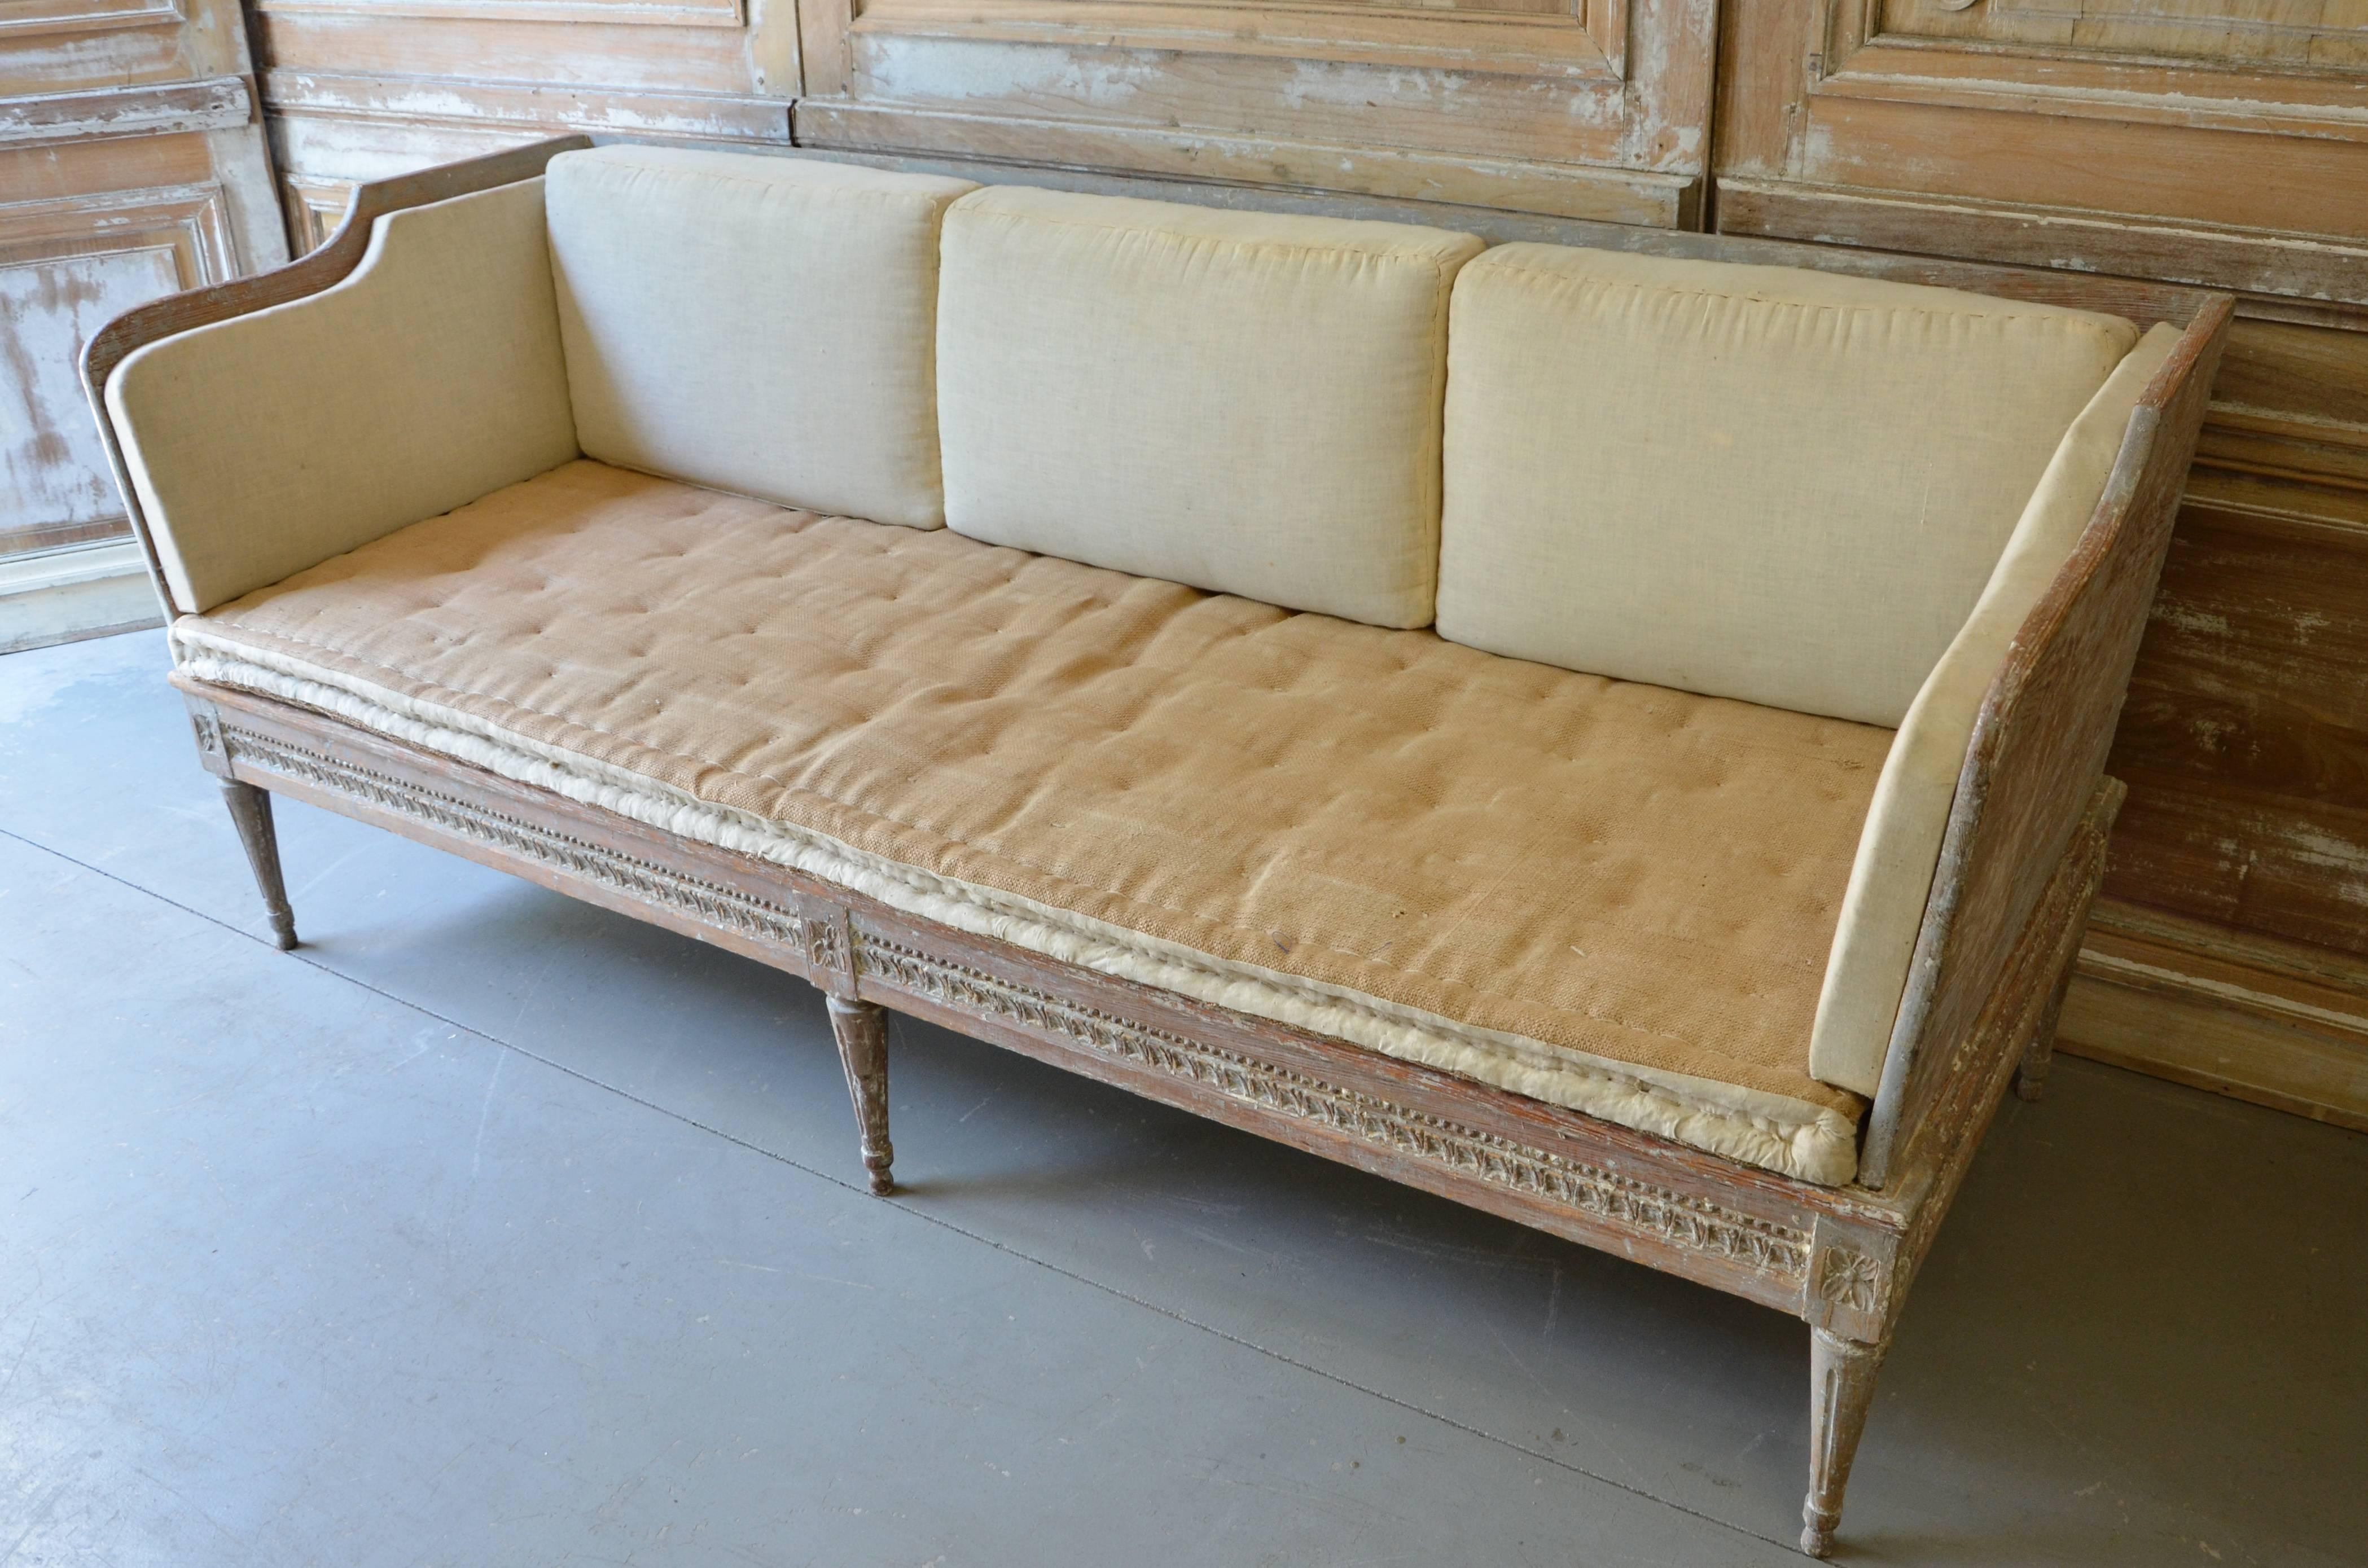 18th century Swedish Gustavian period "Trågsoffa," finished on three sides with leaf rod and floral rosette medallions above reeded legs. Scraped to original cream white/blue finish. Original cussions ready for new upholstery.
Stockholm,